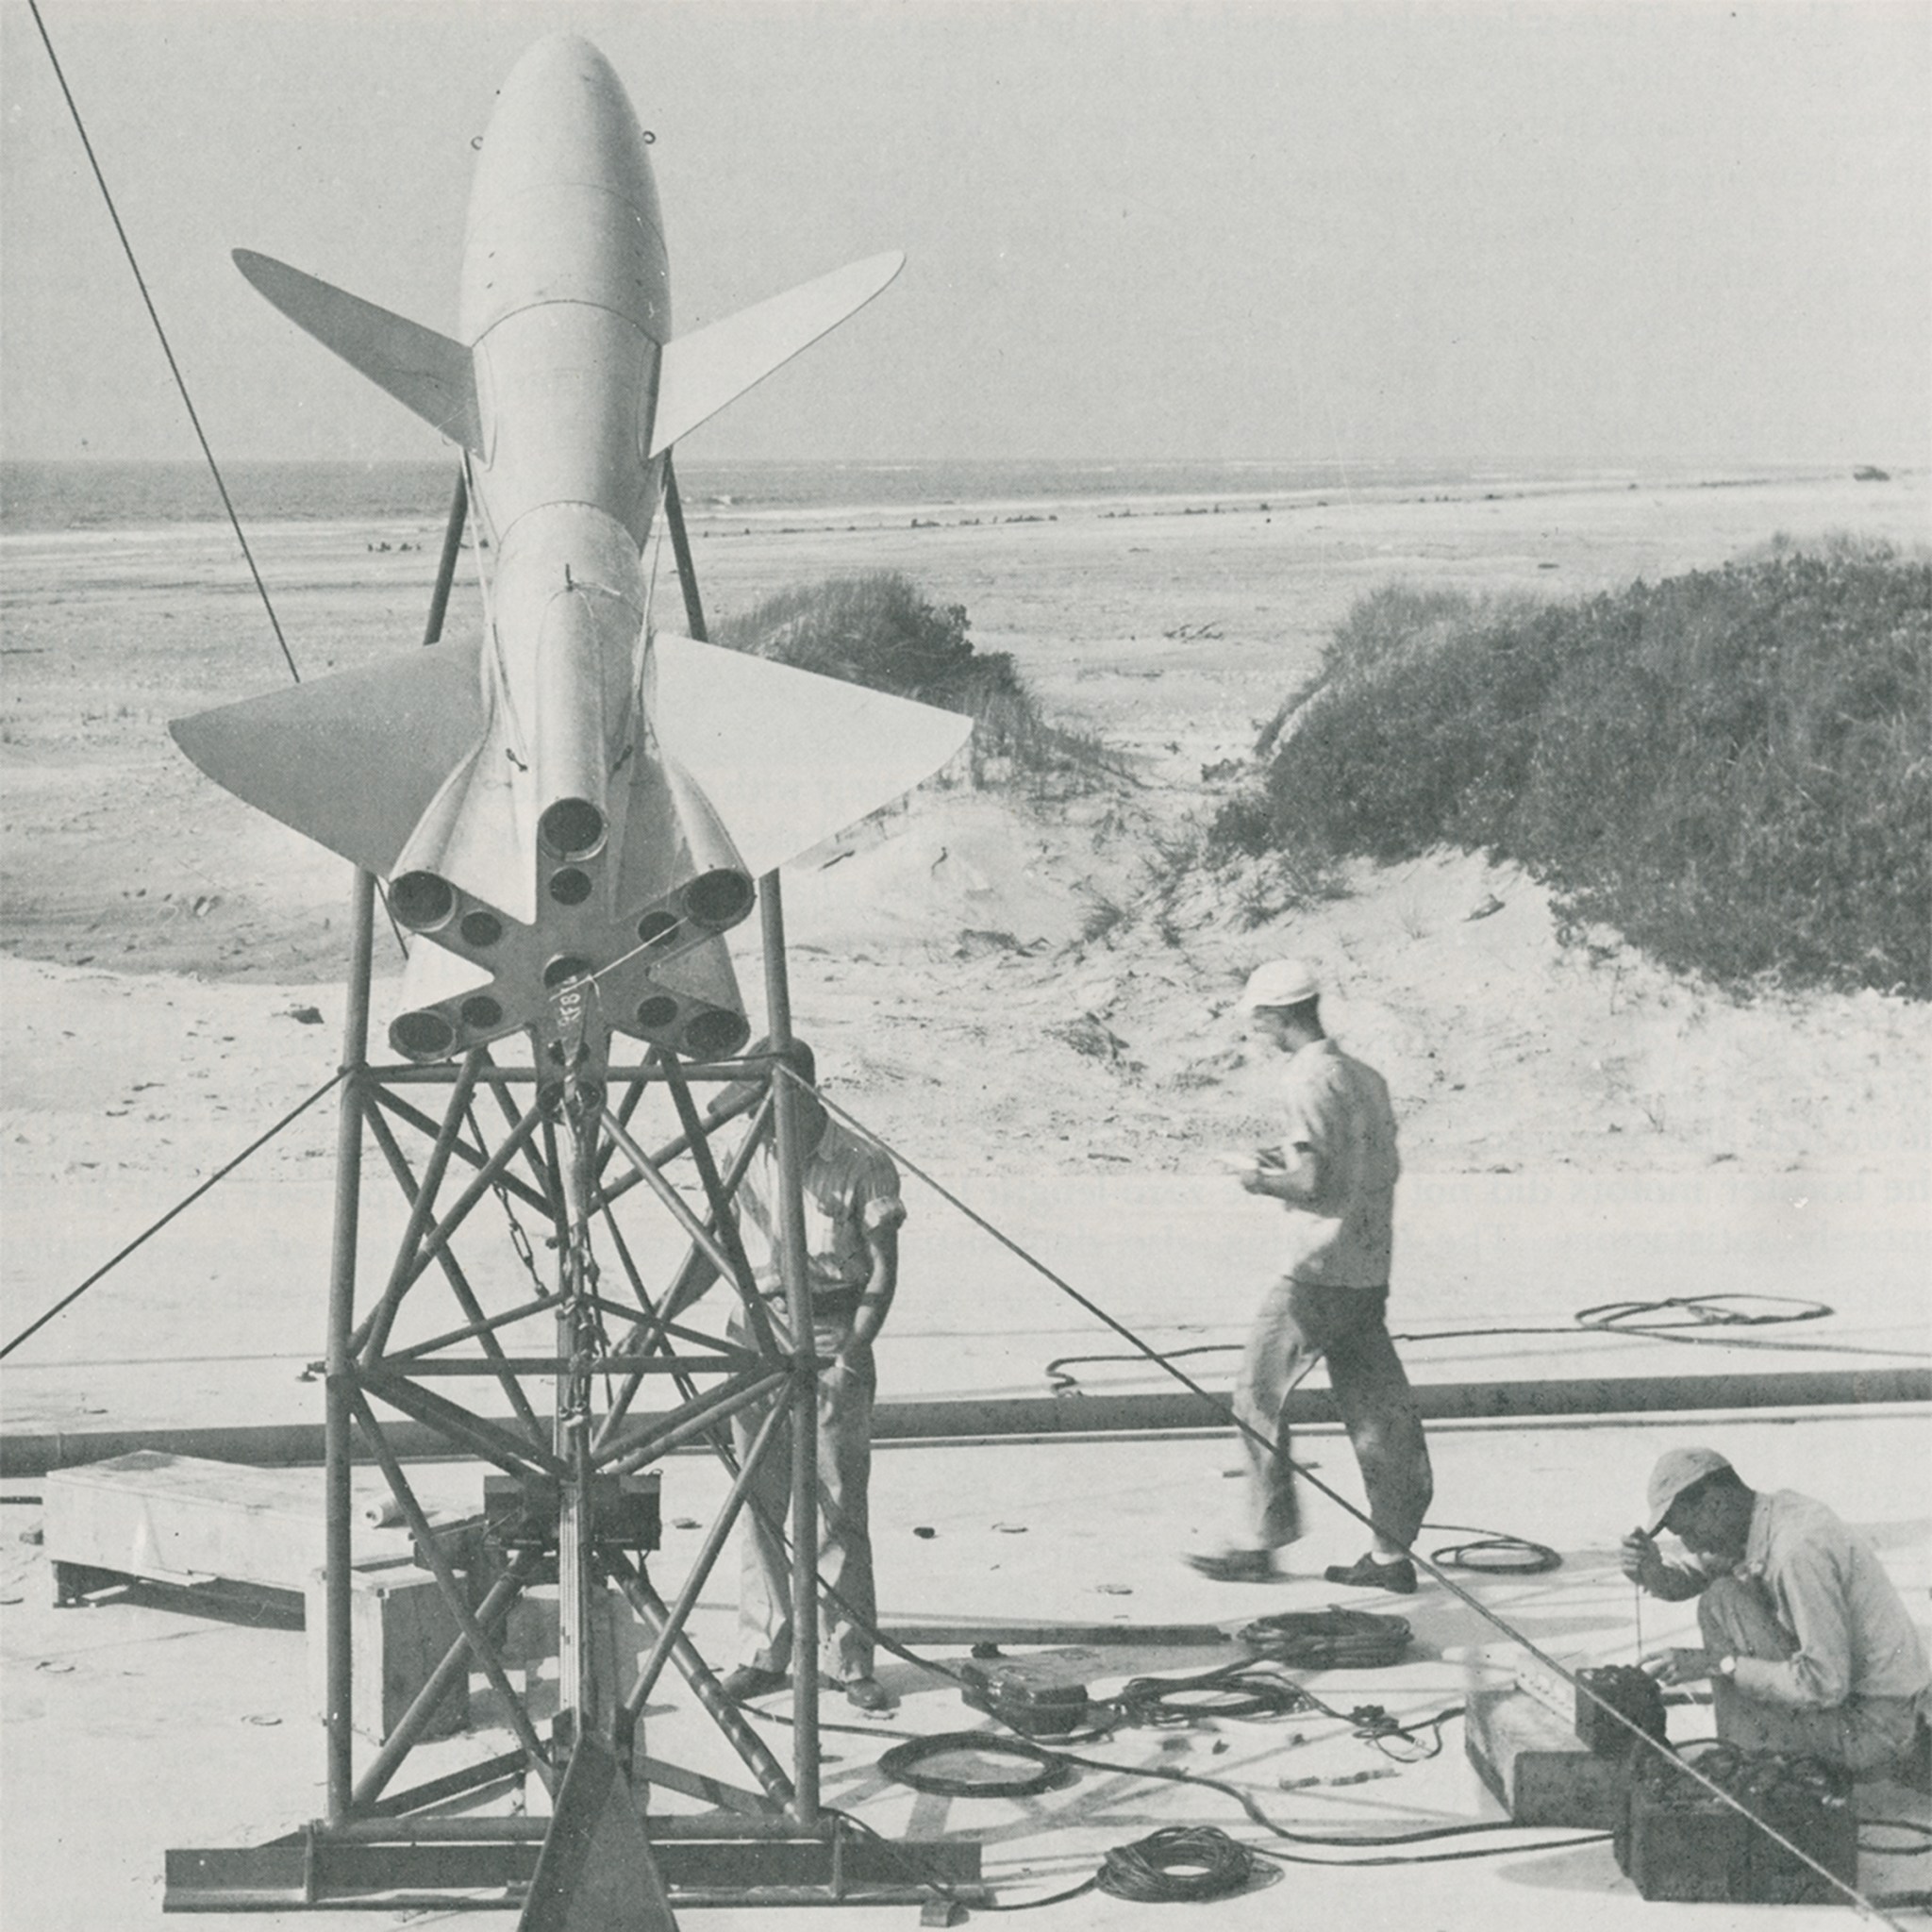 Black and white image of a rocket on a metal structure with people working around it.